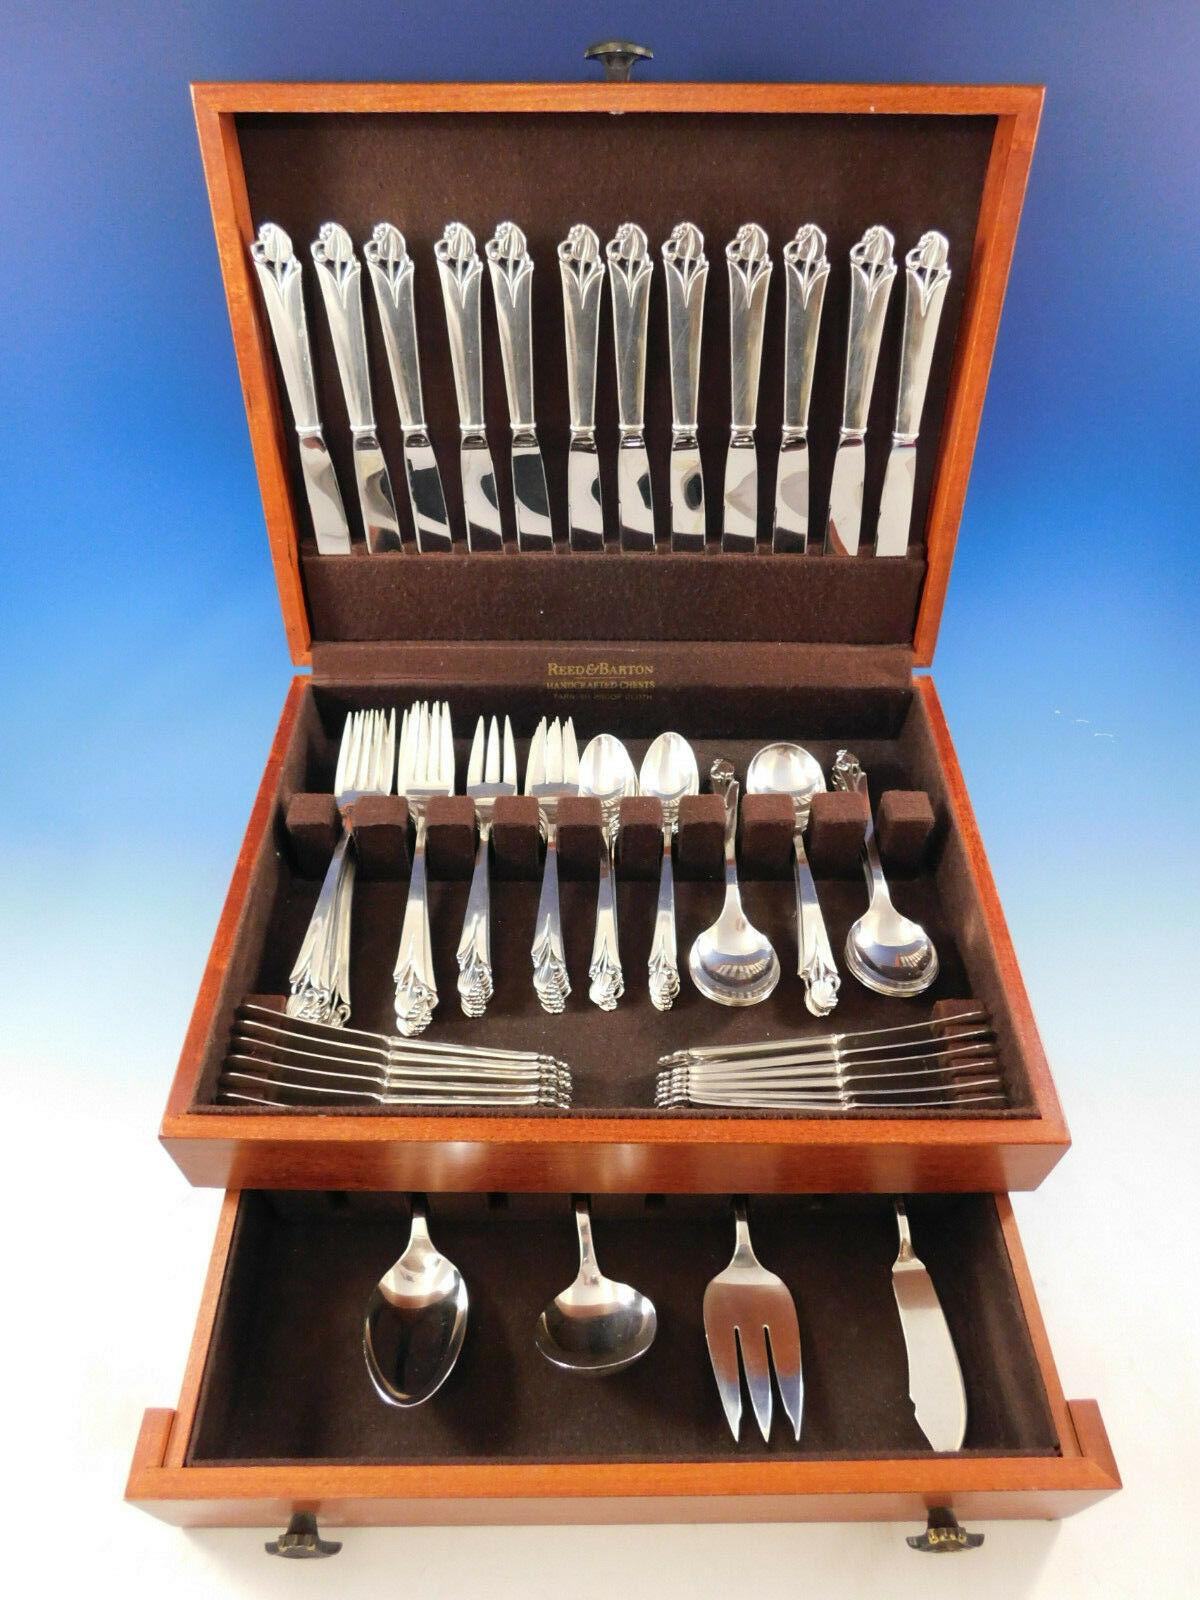 Woodlily by Frank Smith (Glossy finish) sterling silver flatware set. This graceful pattern features a 'Danish-moderne style' with stylized leaf. This 77 piece set includes:

12 knives, 8 3/4